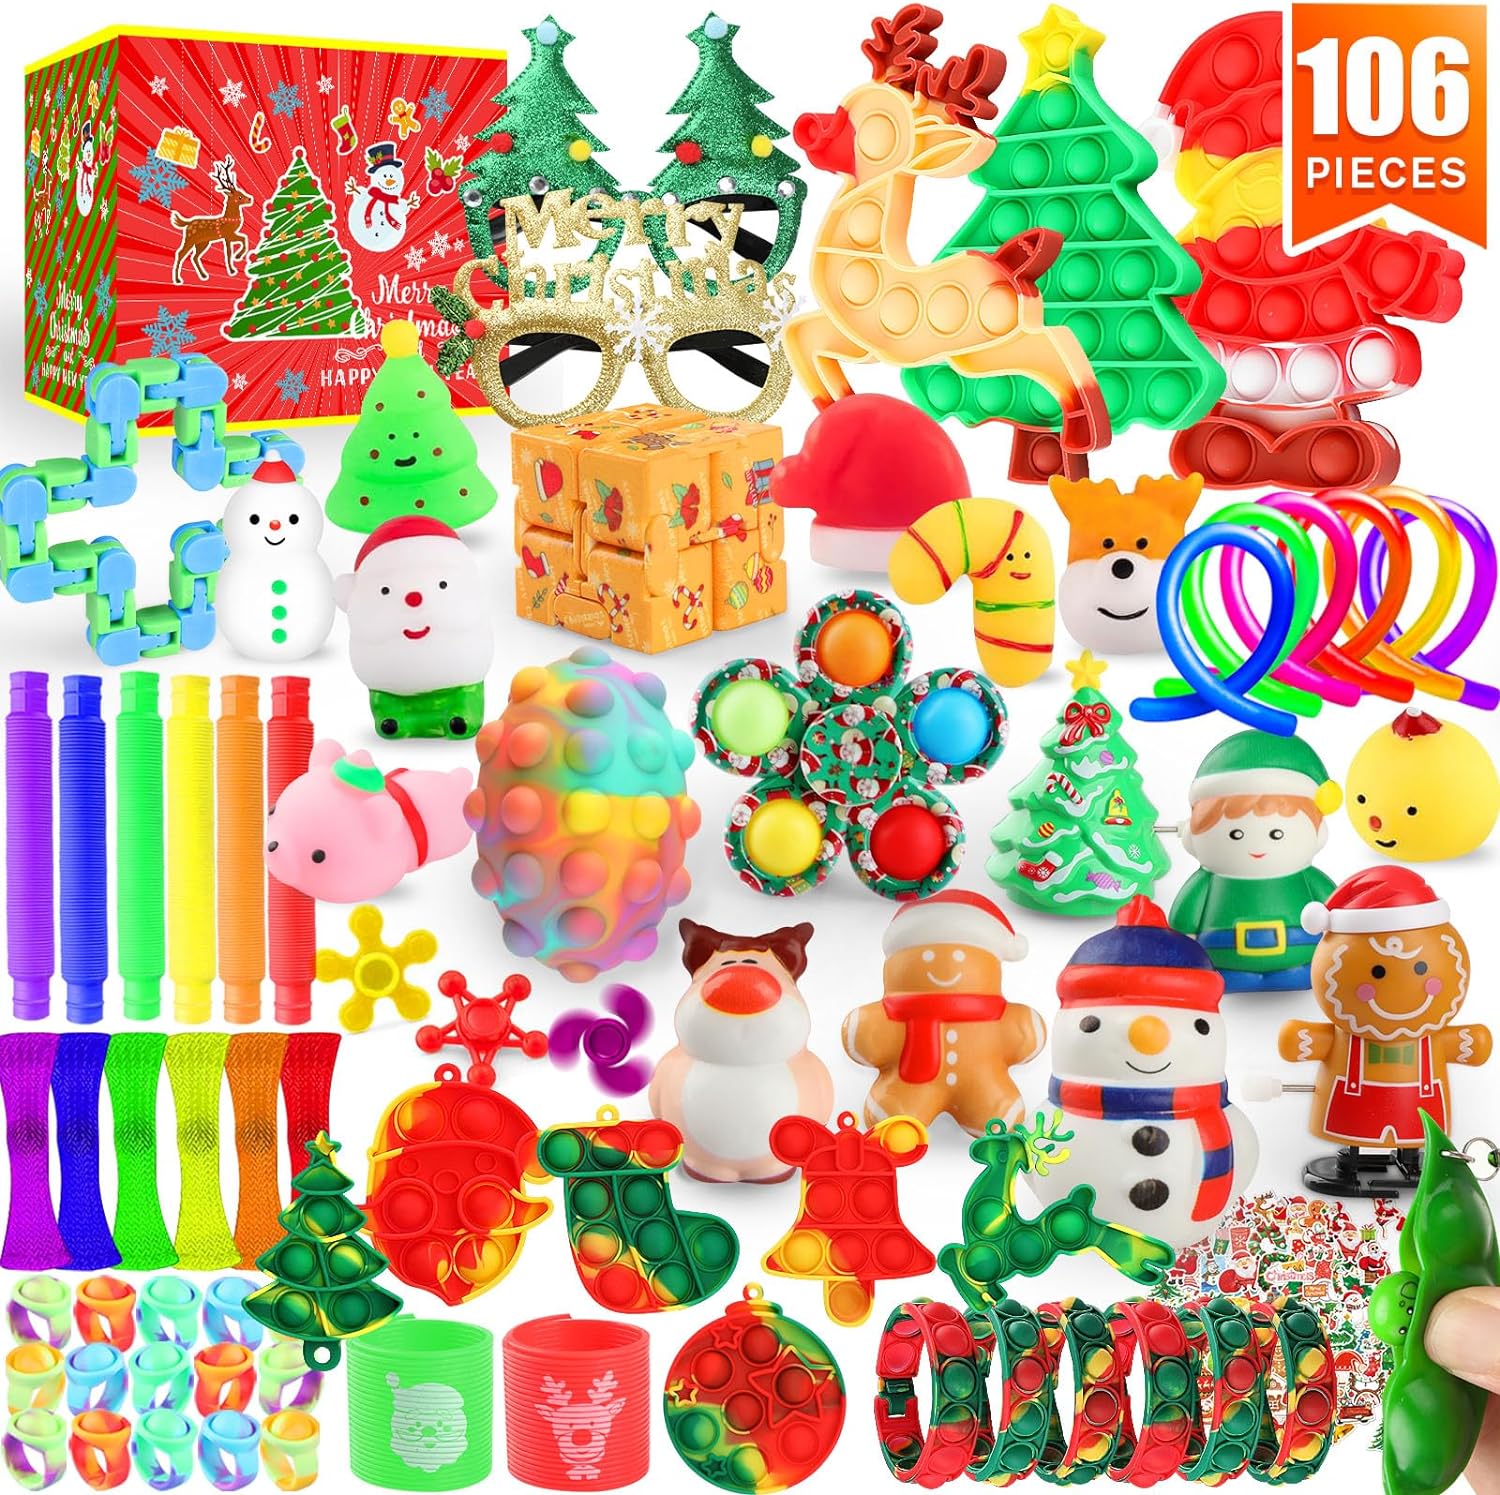 Fidget Toys Set, 106 Pack Christmas Party Favors Keychain Its for Kids Adults, Mini Push Bubble Pops Bulk Sensory Toys, Birthday Gifts Classroom Prizes for Boys Girls Goodie Bag Treasure Chest Box